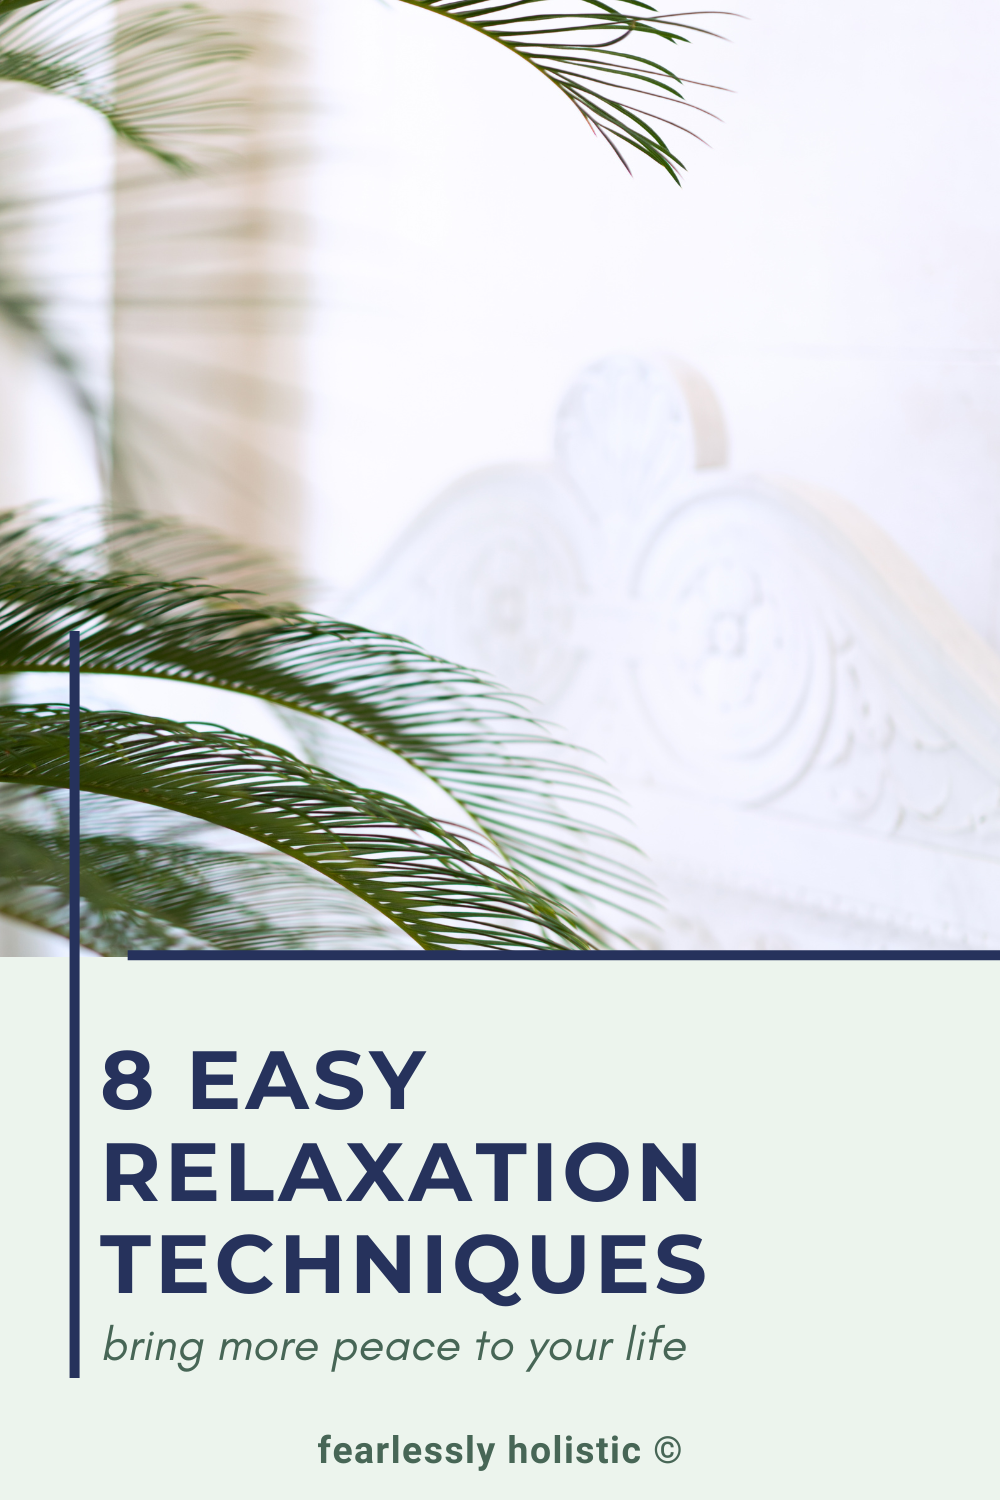 8 Easy Relaxation Techniques for A More Peaceful Life